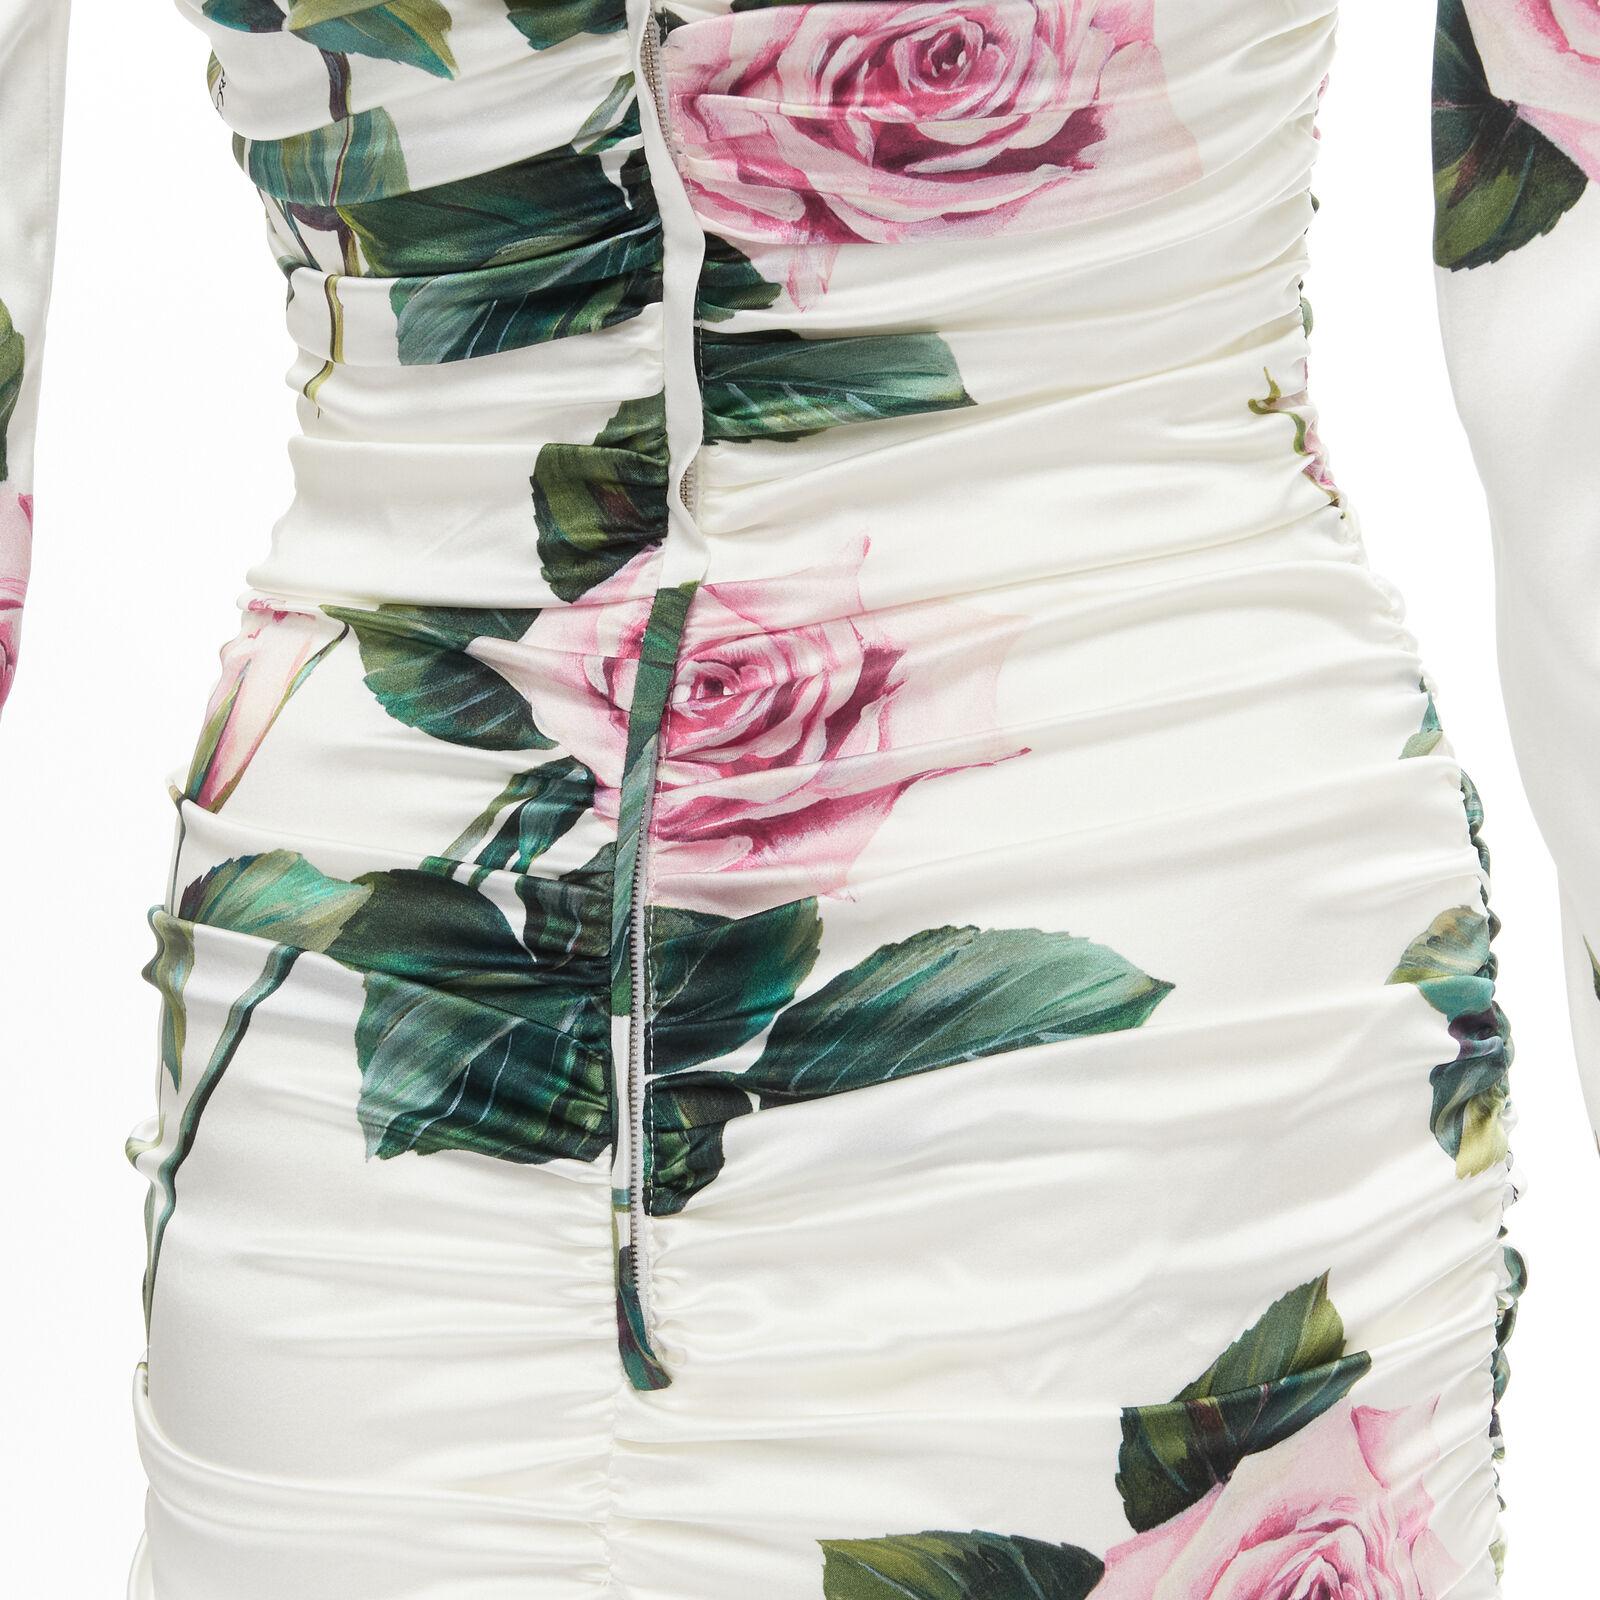 DOLCE GABBANA white pink rose leaf print ruched draped midi dress IT38 XS
Reference: AAWC/A00024
Brand: Dolce Gabbana
Designer: Domenico Dolce and Stefano Gabbana
Material: Silk, Blend
Color: White, Pink
Pattern: Floral
Closure: Zip
Extra Details: